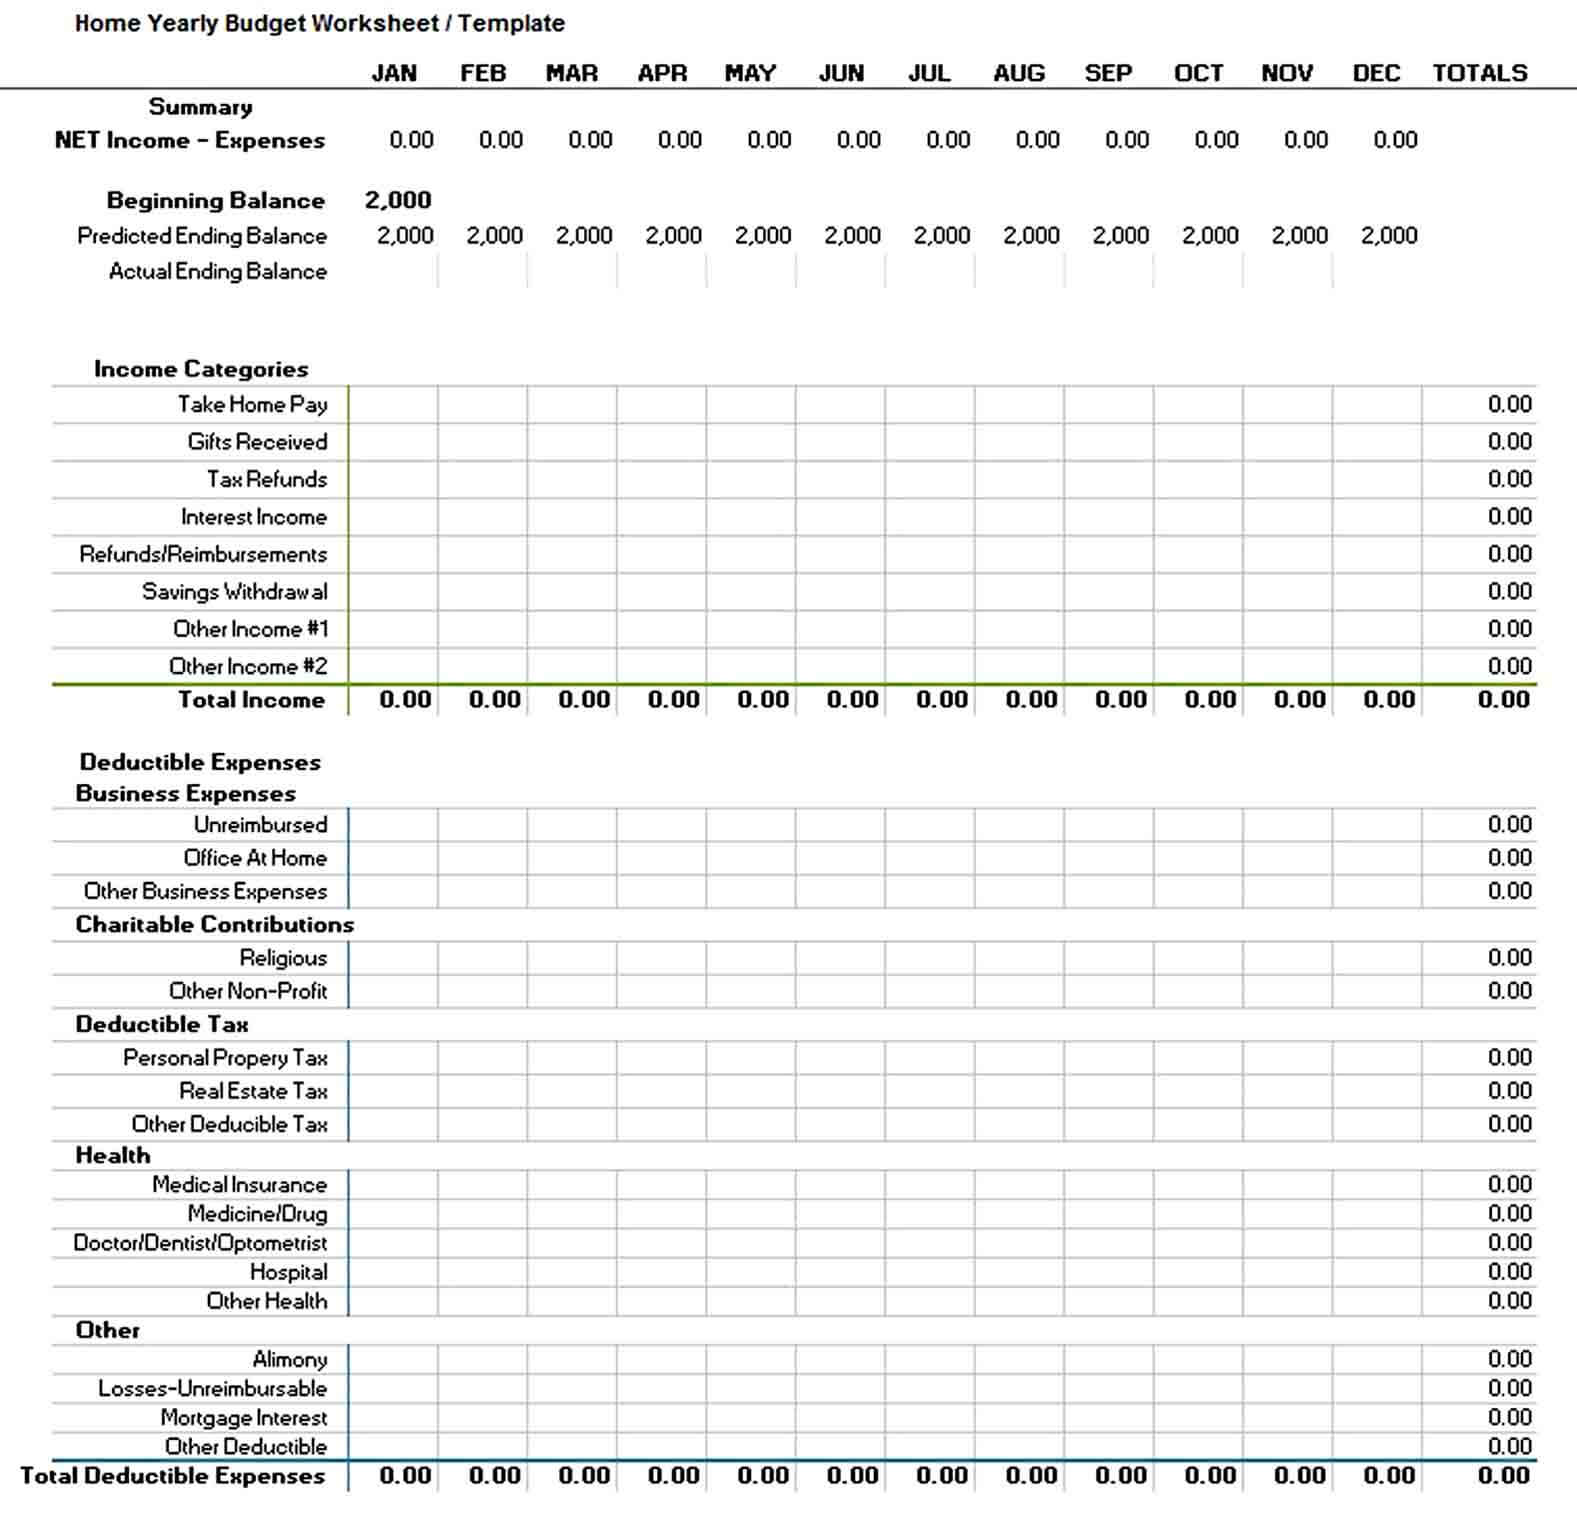 home yearly budget worksheet template